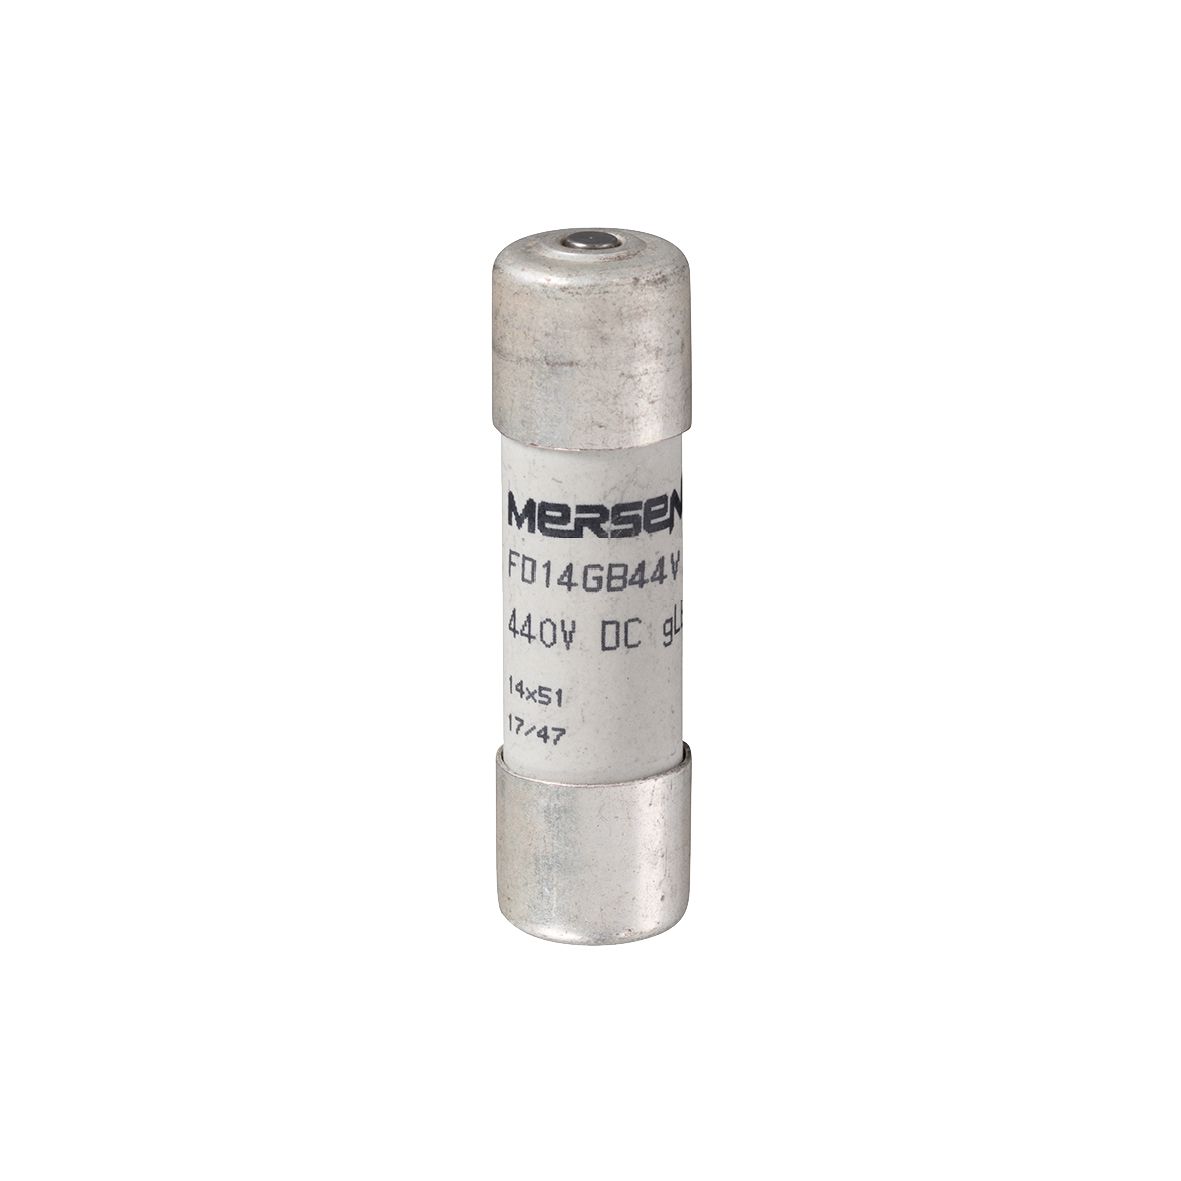 S098410 - Cylindrical fuse-link GRB 440VDC 14x51, 32A with striker